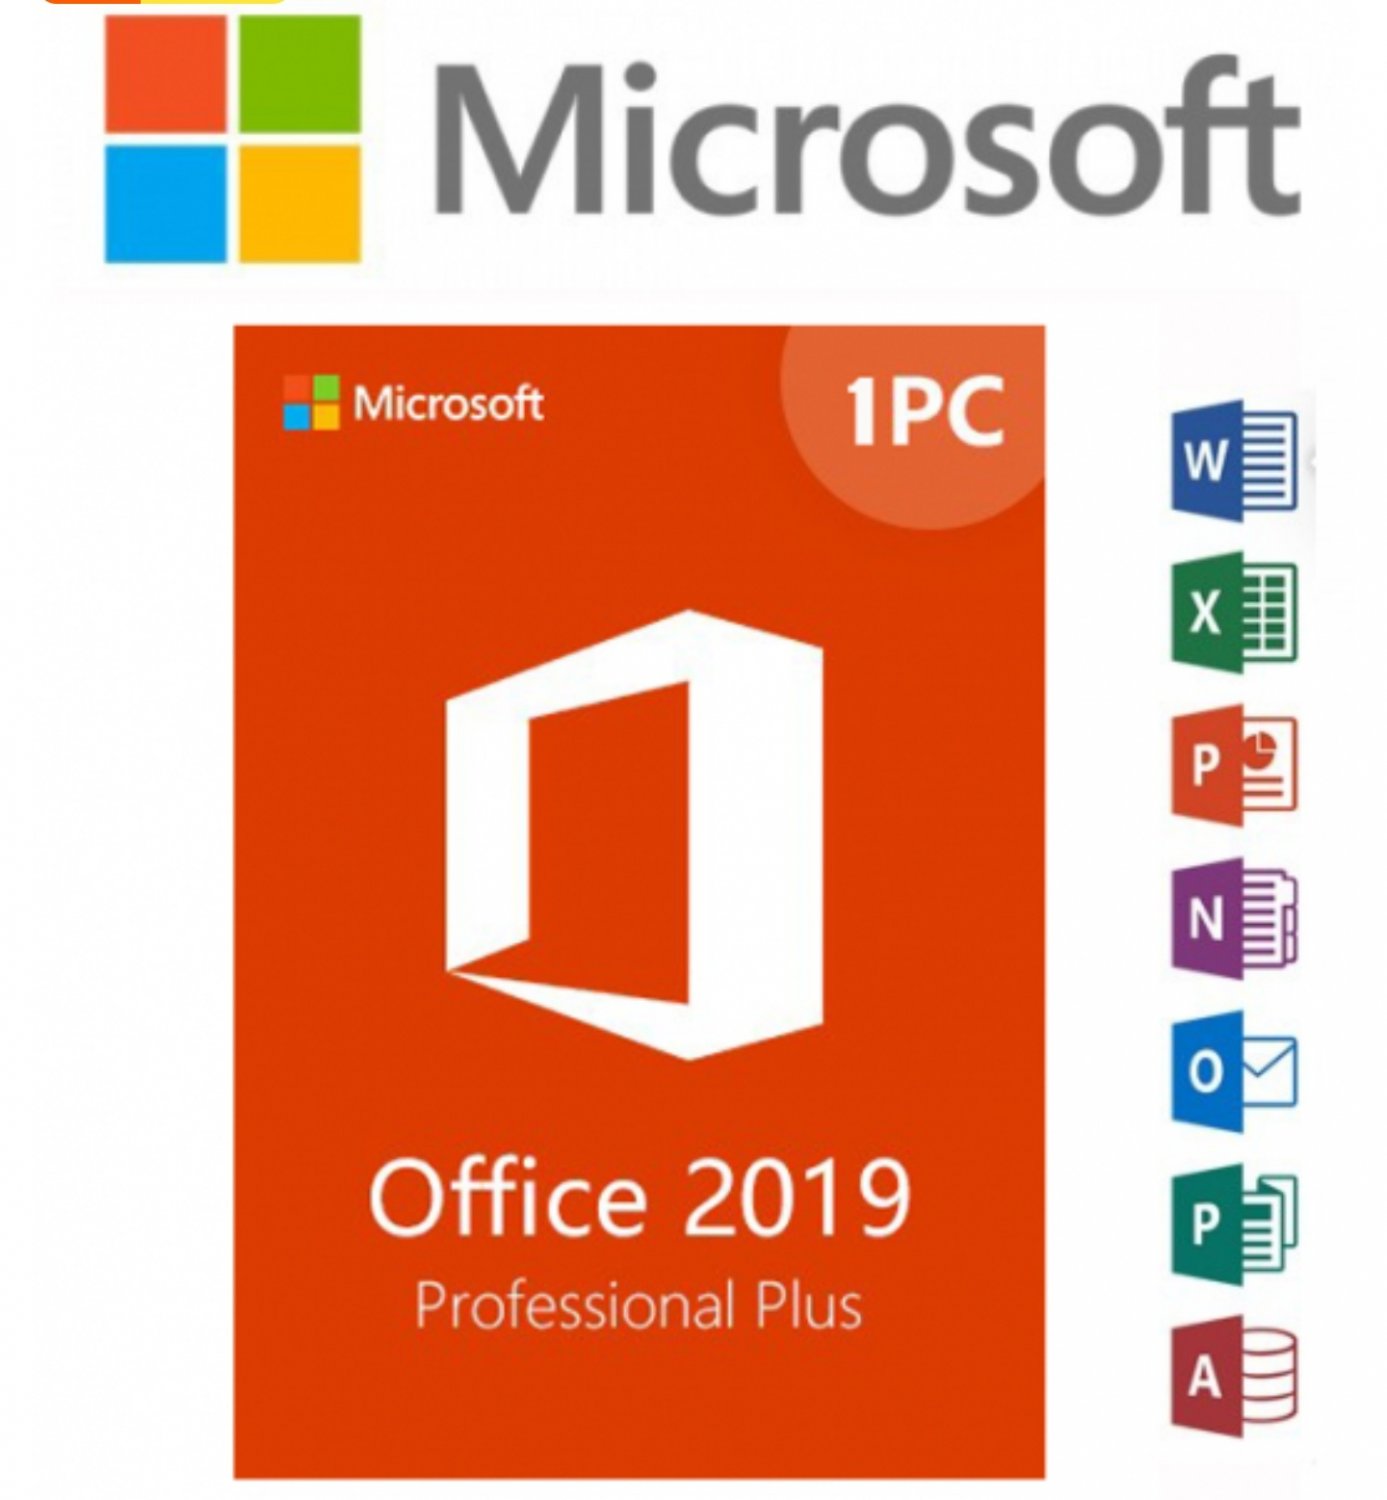 microsoft powerpoint 2019 free download for windows 7